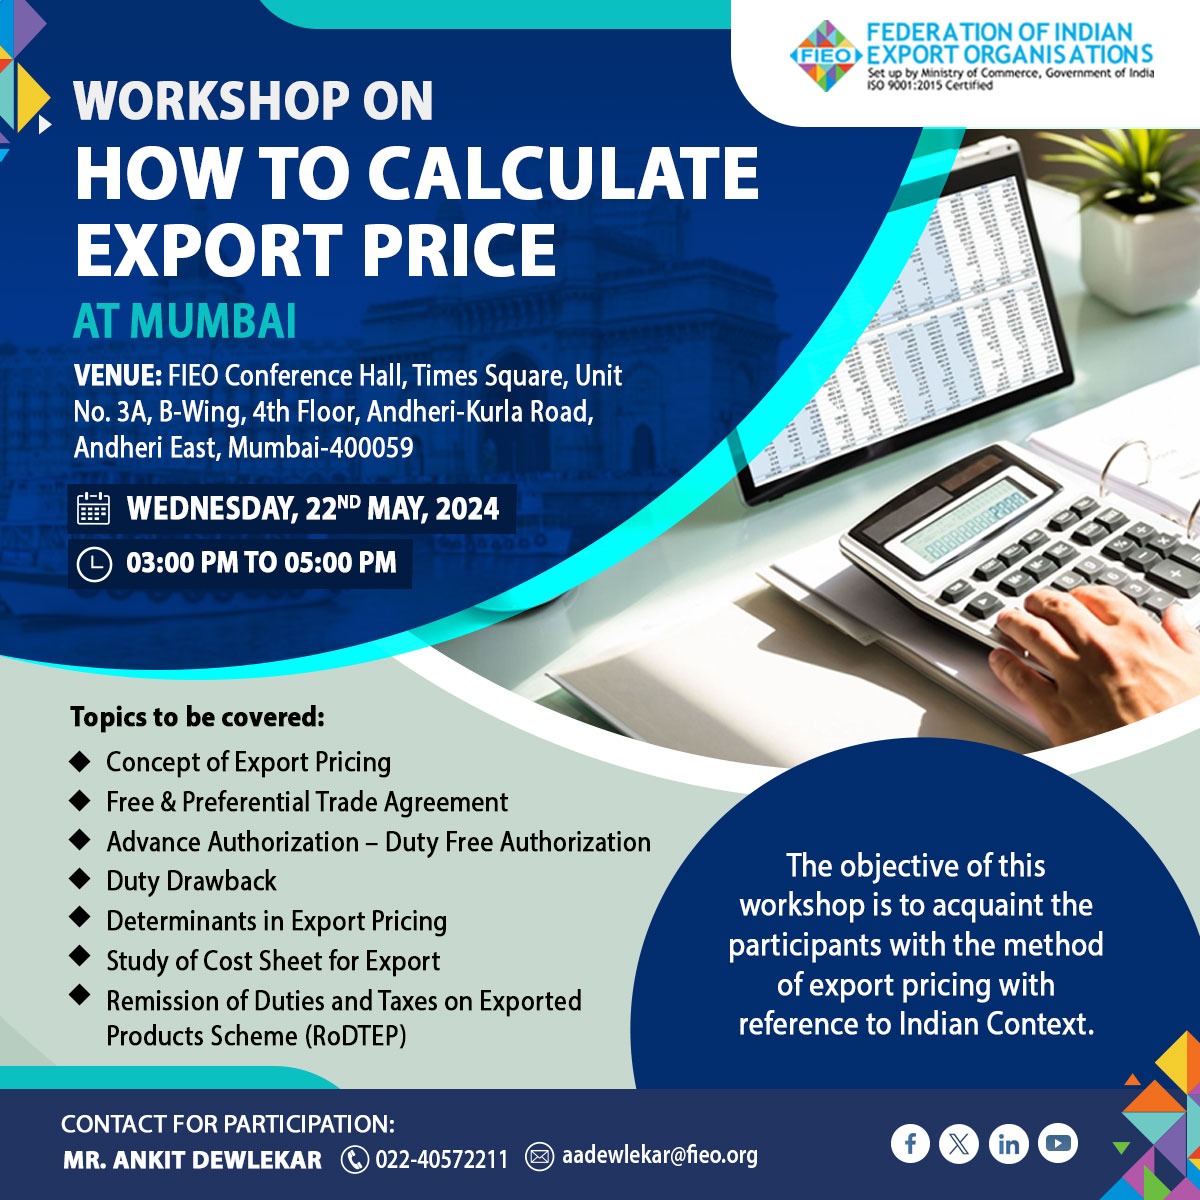 Join us for a Workshop on How to Calculate Export Price in Mumbai on May 22nd! Master the art of export pricing and ensure the success of your deals. Learn about determinants, cost sheets, and RoDTEP.  

Register online: fieo.org/HCEP 

#ExportPricing #Workshop #FIEO